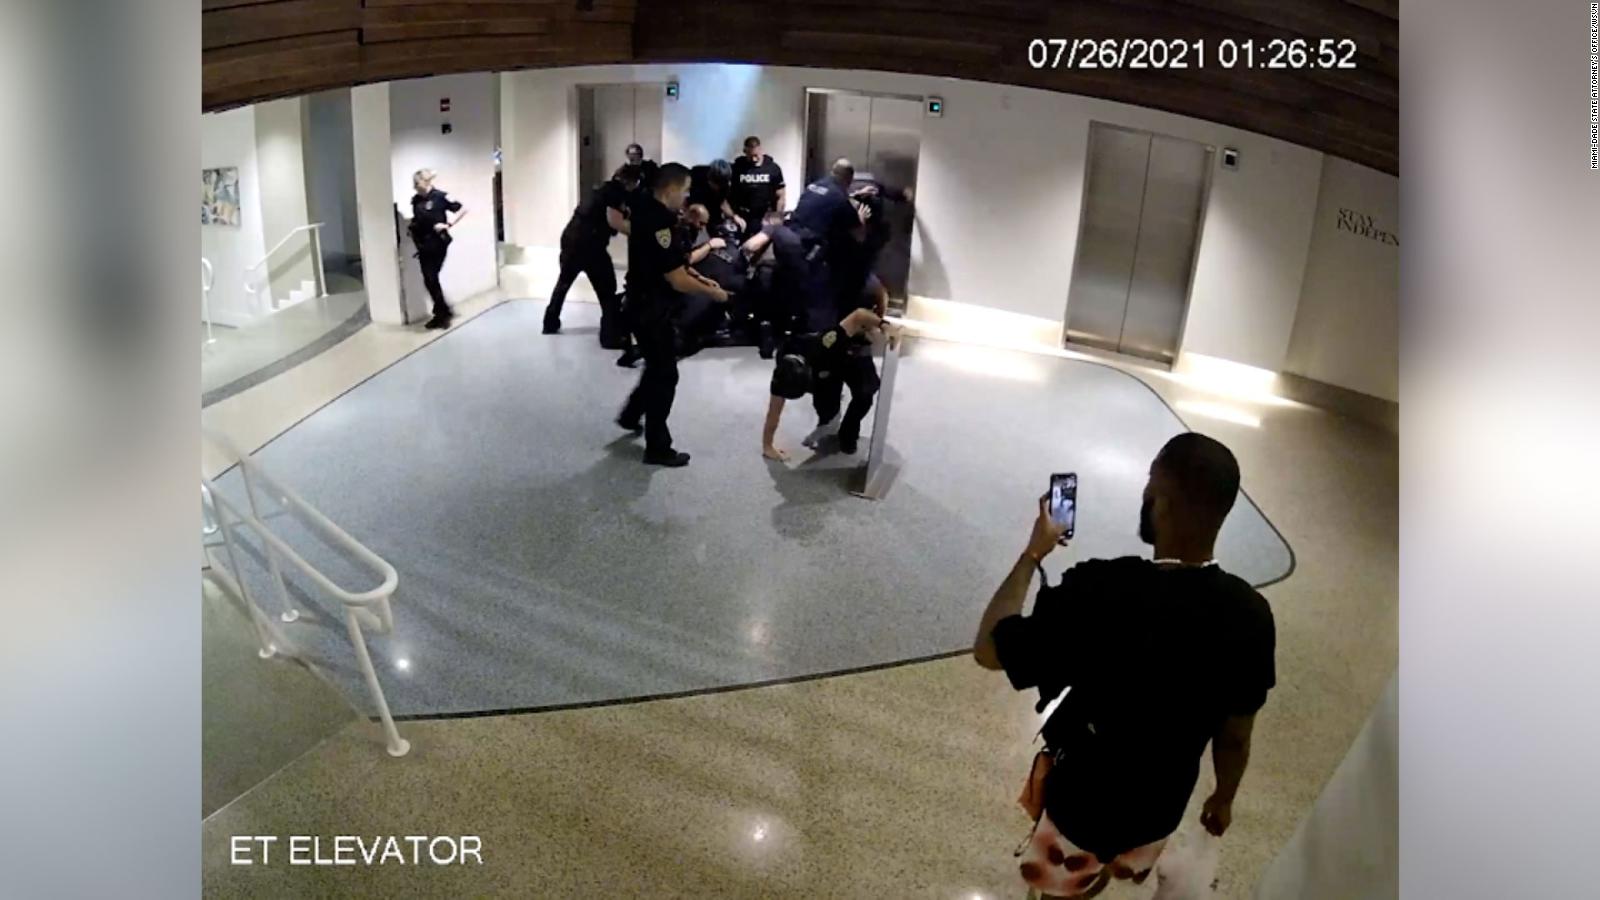 5 Miami Beach Officers Face Charges After The Alleged Use Of Excessive Force During Arrest